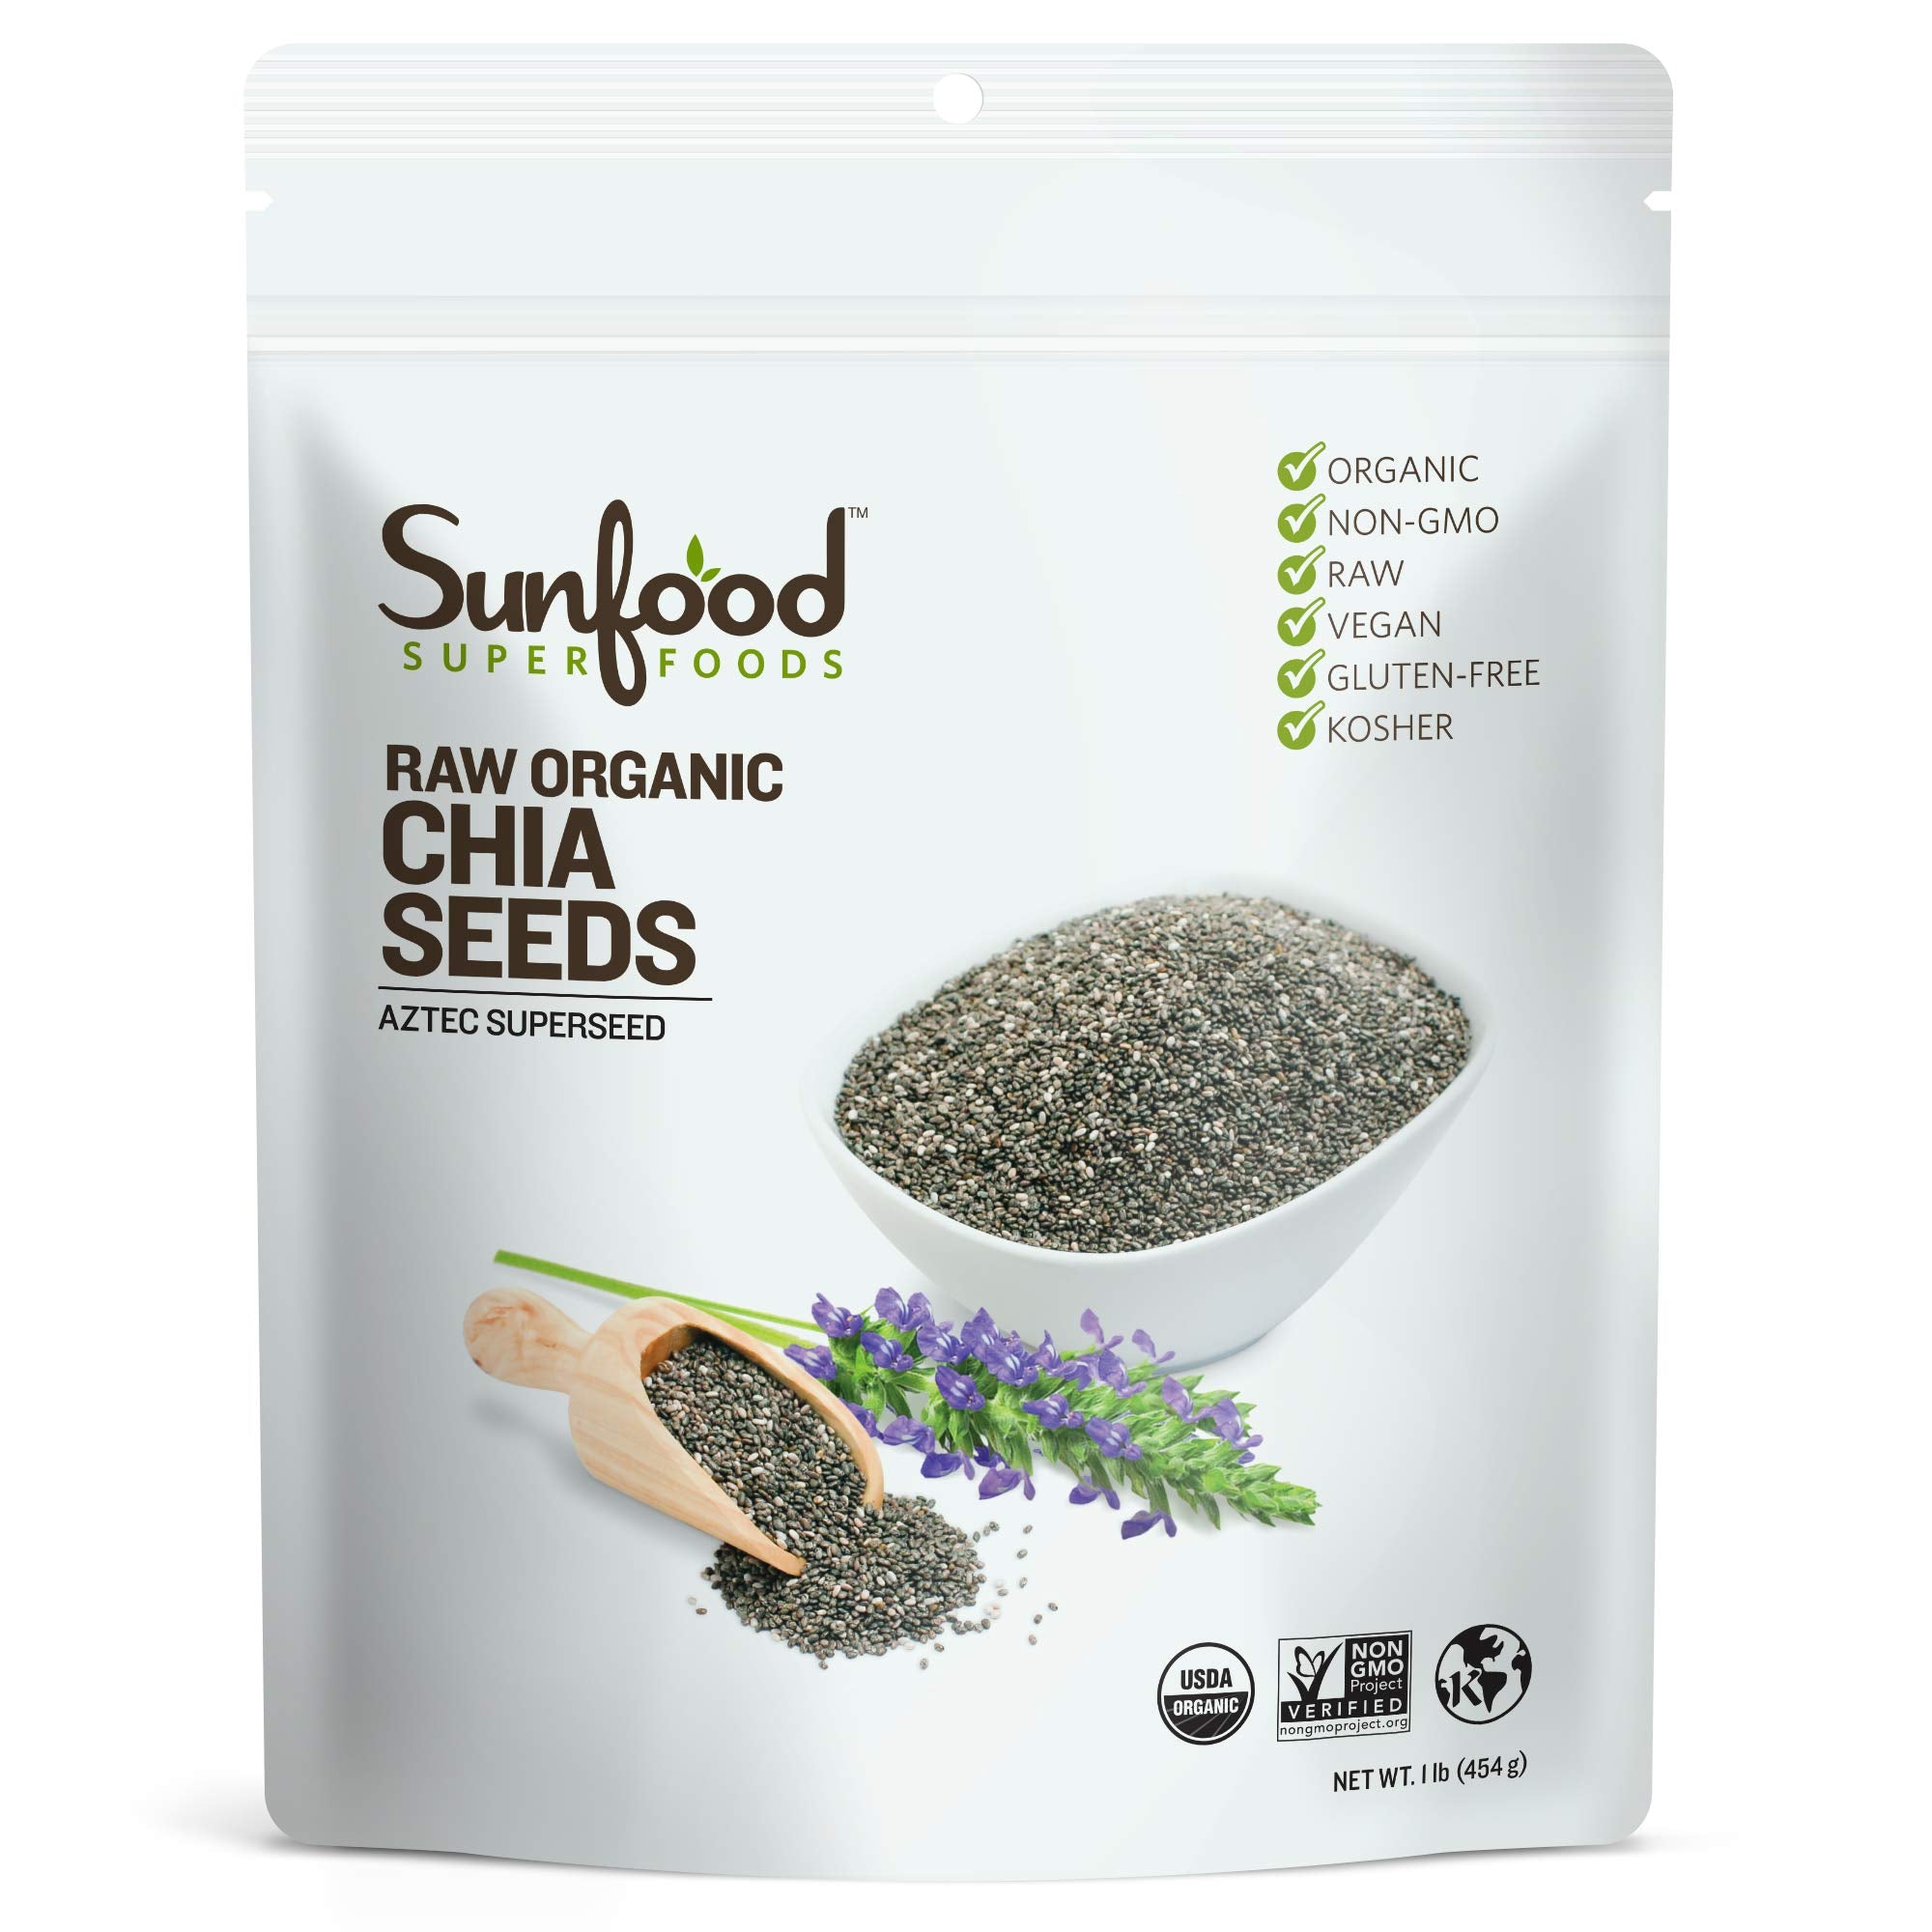 Sunfood Superfoods Chia Seeds - Organic, Whole - Omega Rich & Heart Healthy Keto Super-Seed - Great for Weight-Loss - Non-GMO - Enjoy As-Is or Ground in Smoothies - Bulk 1 lb Bag